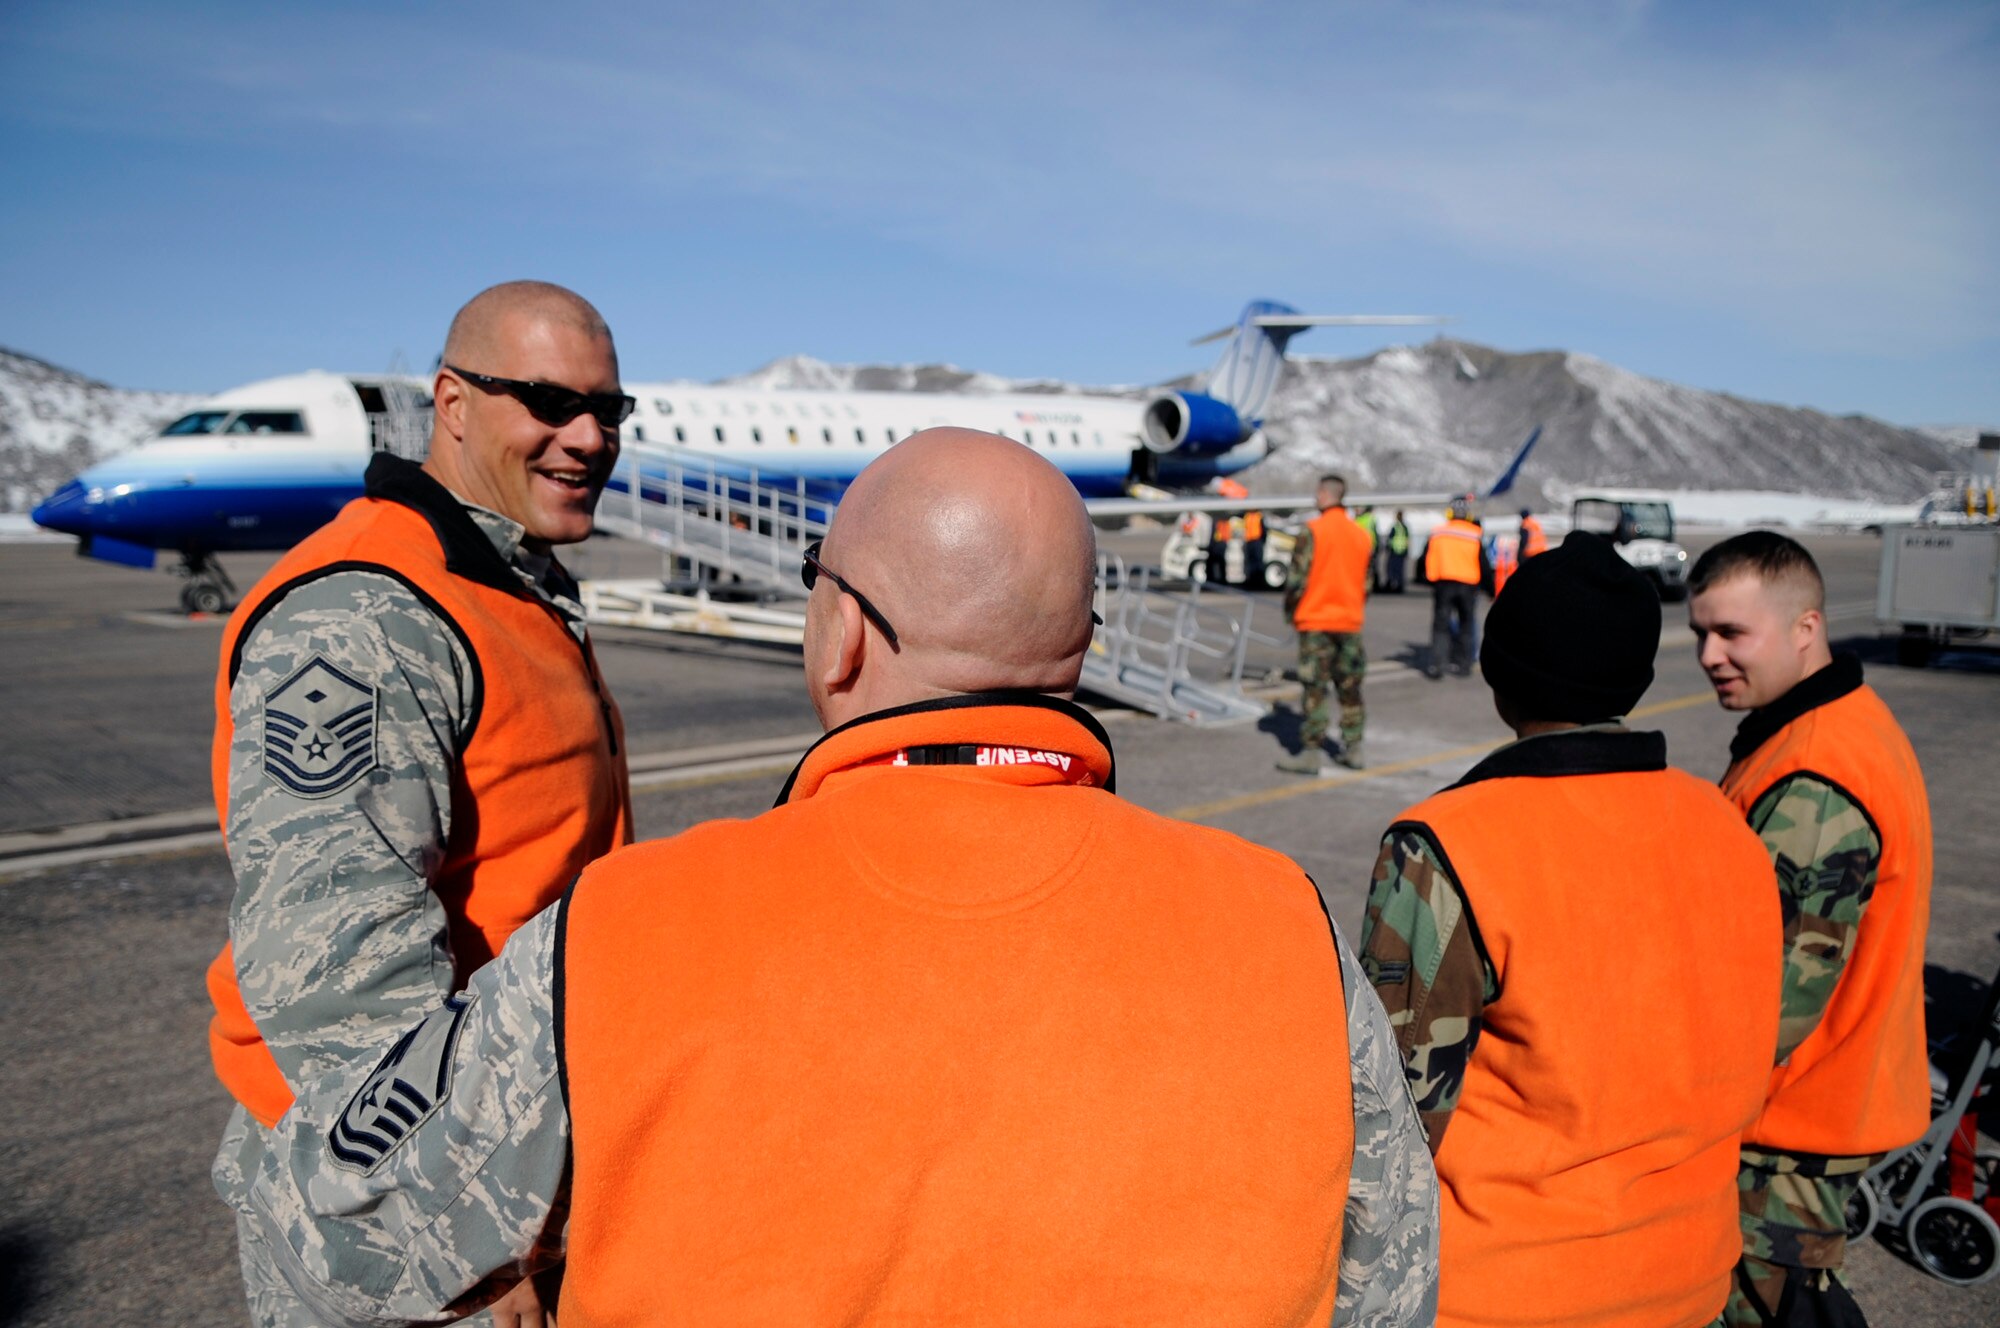 Airmen from Luke Air Force Base, Ariz. wait to escort veterans off a United aircraft March 28 at the Aspen Airport, Colo. Veterans from all over the world fly into Aspen to attend the Disabled American Veterans Winter Sports Clinic. (U.S. Air Force photo/Staff Sgt. Desiree N. Palacios)

